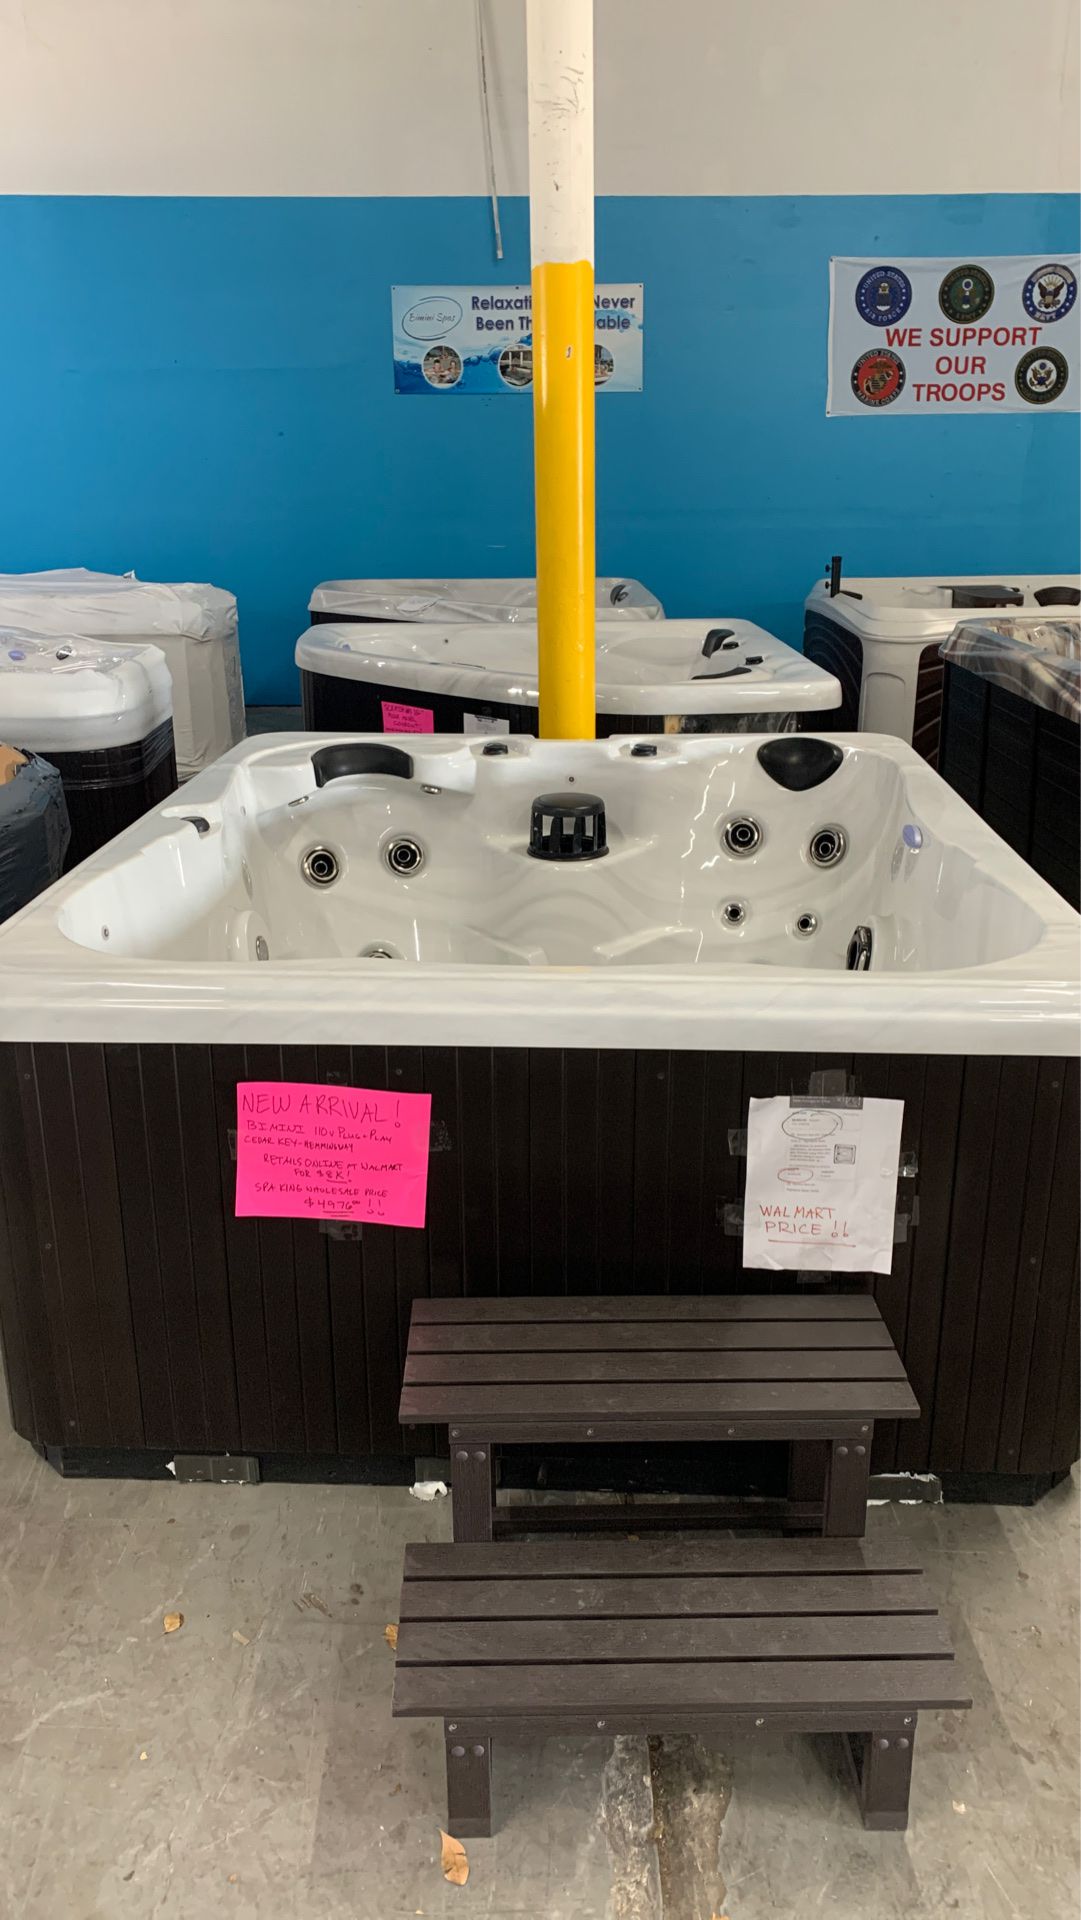 Wholesale hot tubs made in the USA for less!